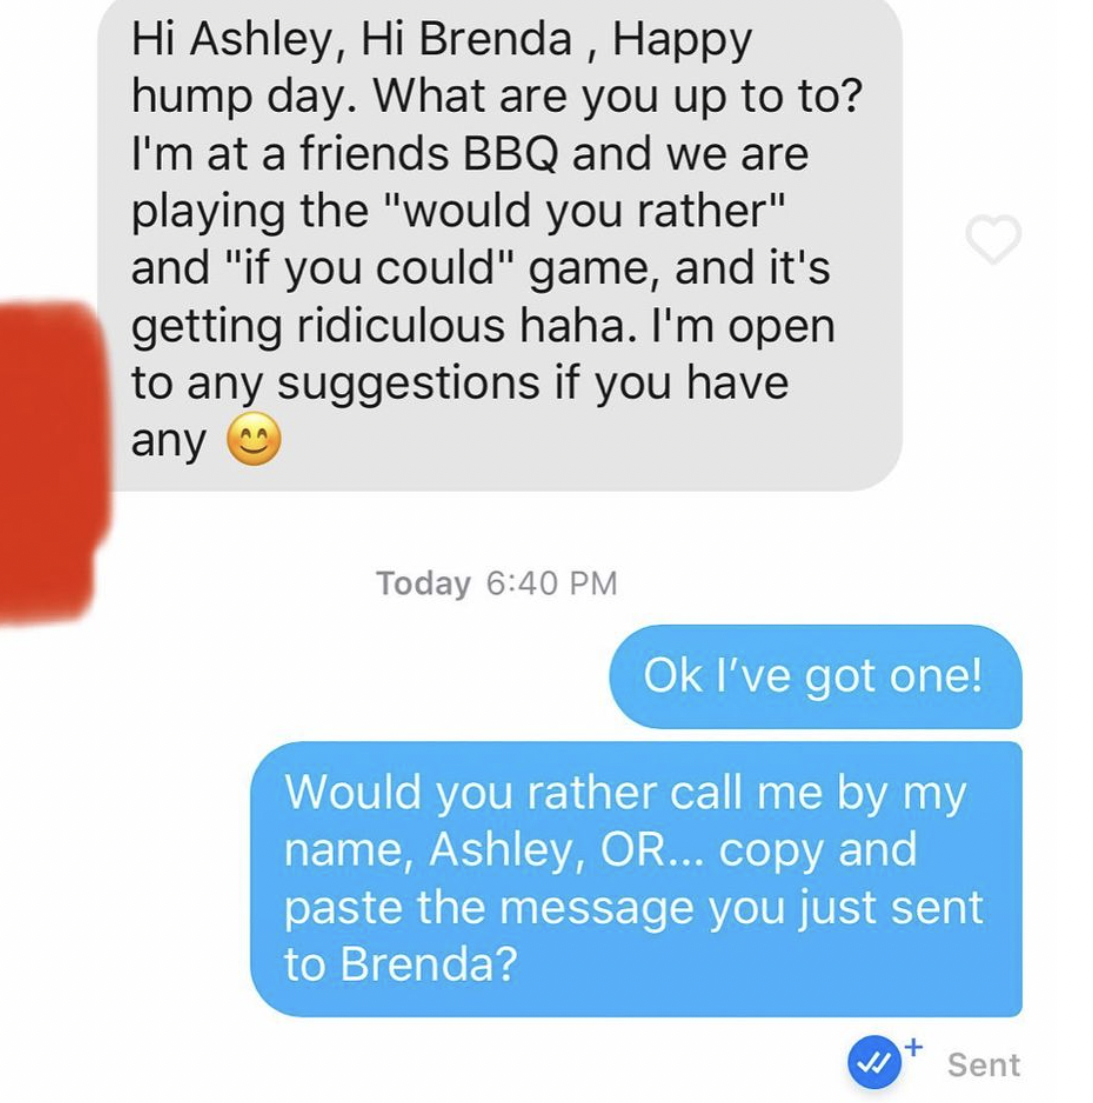 cringe tinder openers - number - Hi Ashley, Hi Brenda, Happy hump day. What are you up to to? I'm at a friends Bbq and we are playing the "would you rather" and "if you could" game, and it's getting ridiculous haha. I'm open to any suggestions if you have